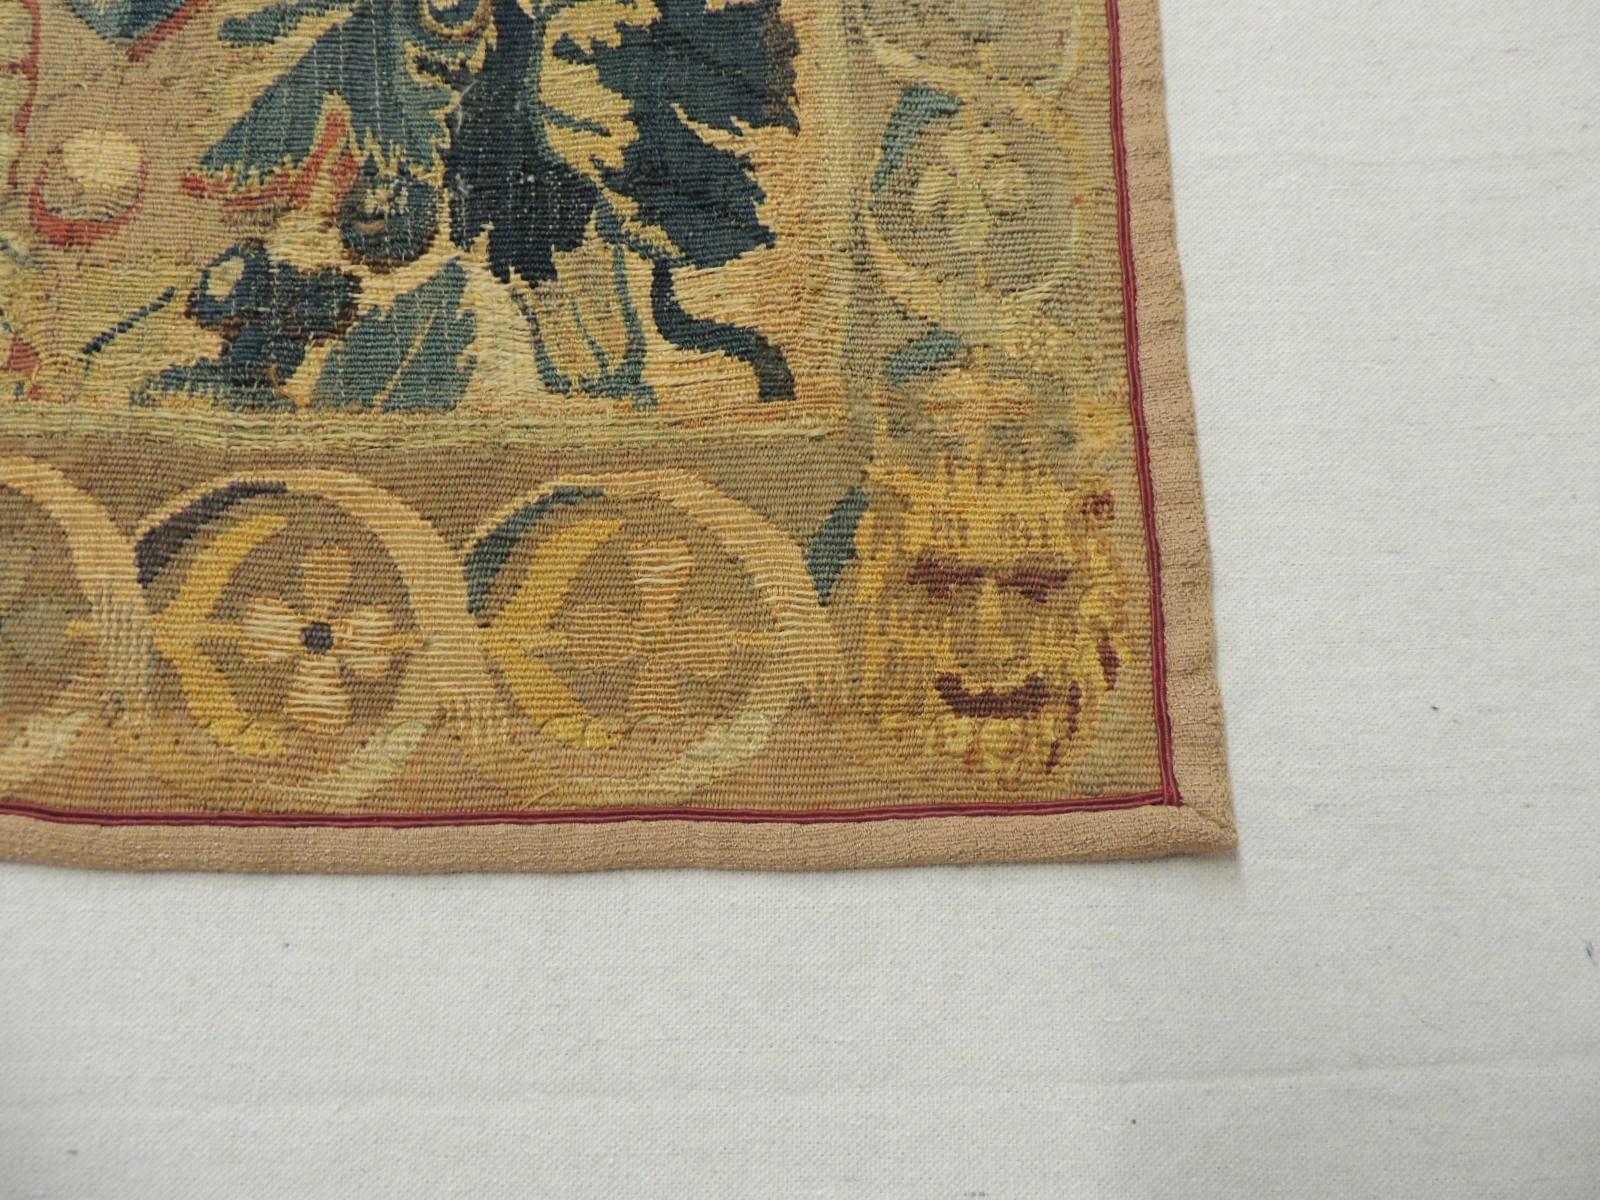 Hand-Crafted 18th Century Aubusson Tapestry Wall-Hanging